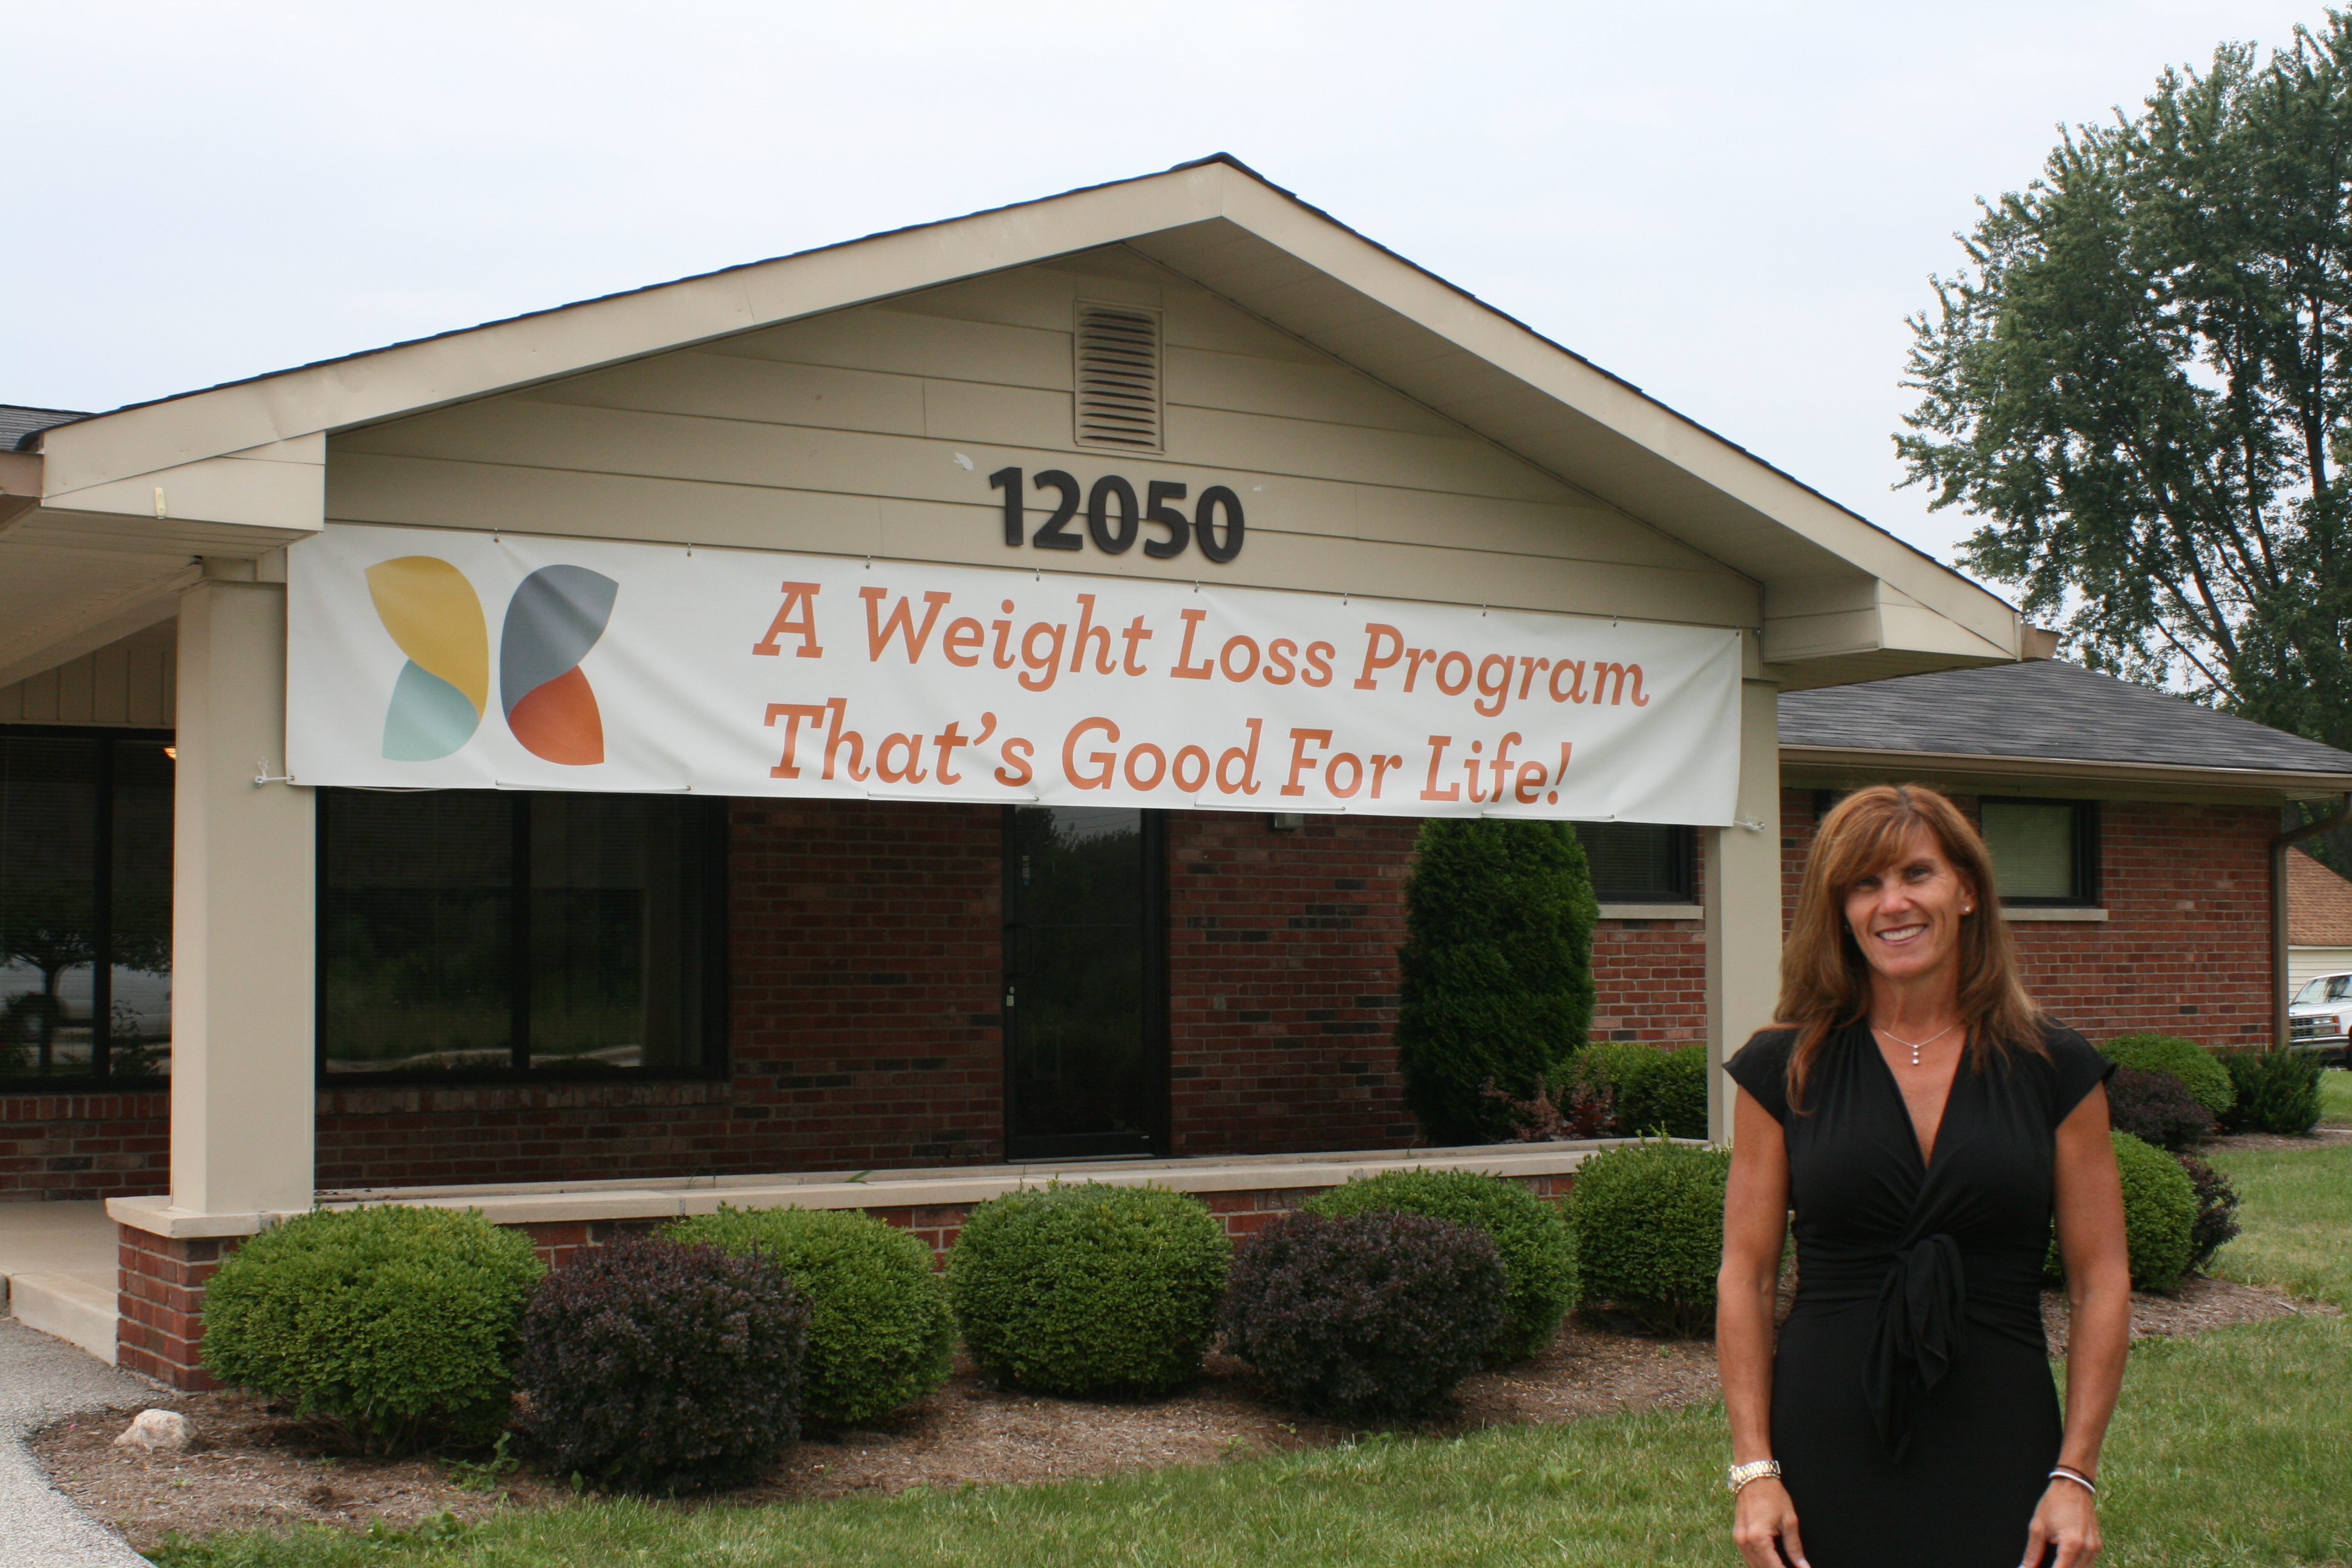 Owner and founder of Live Light Dr. Christy Kirkendal-Watson stands in front of her new office. (Sumbitted photos)